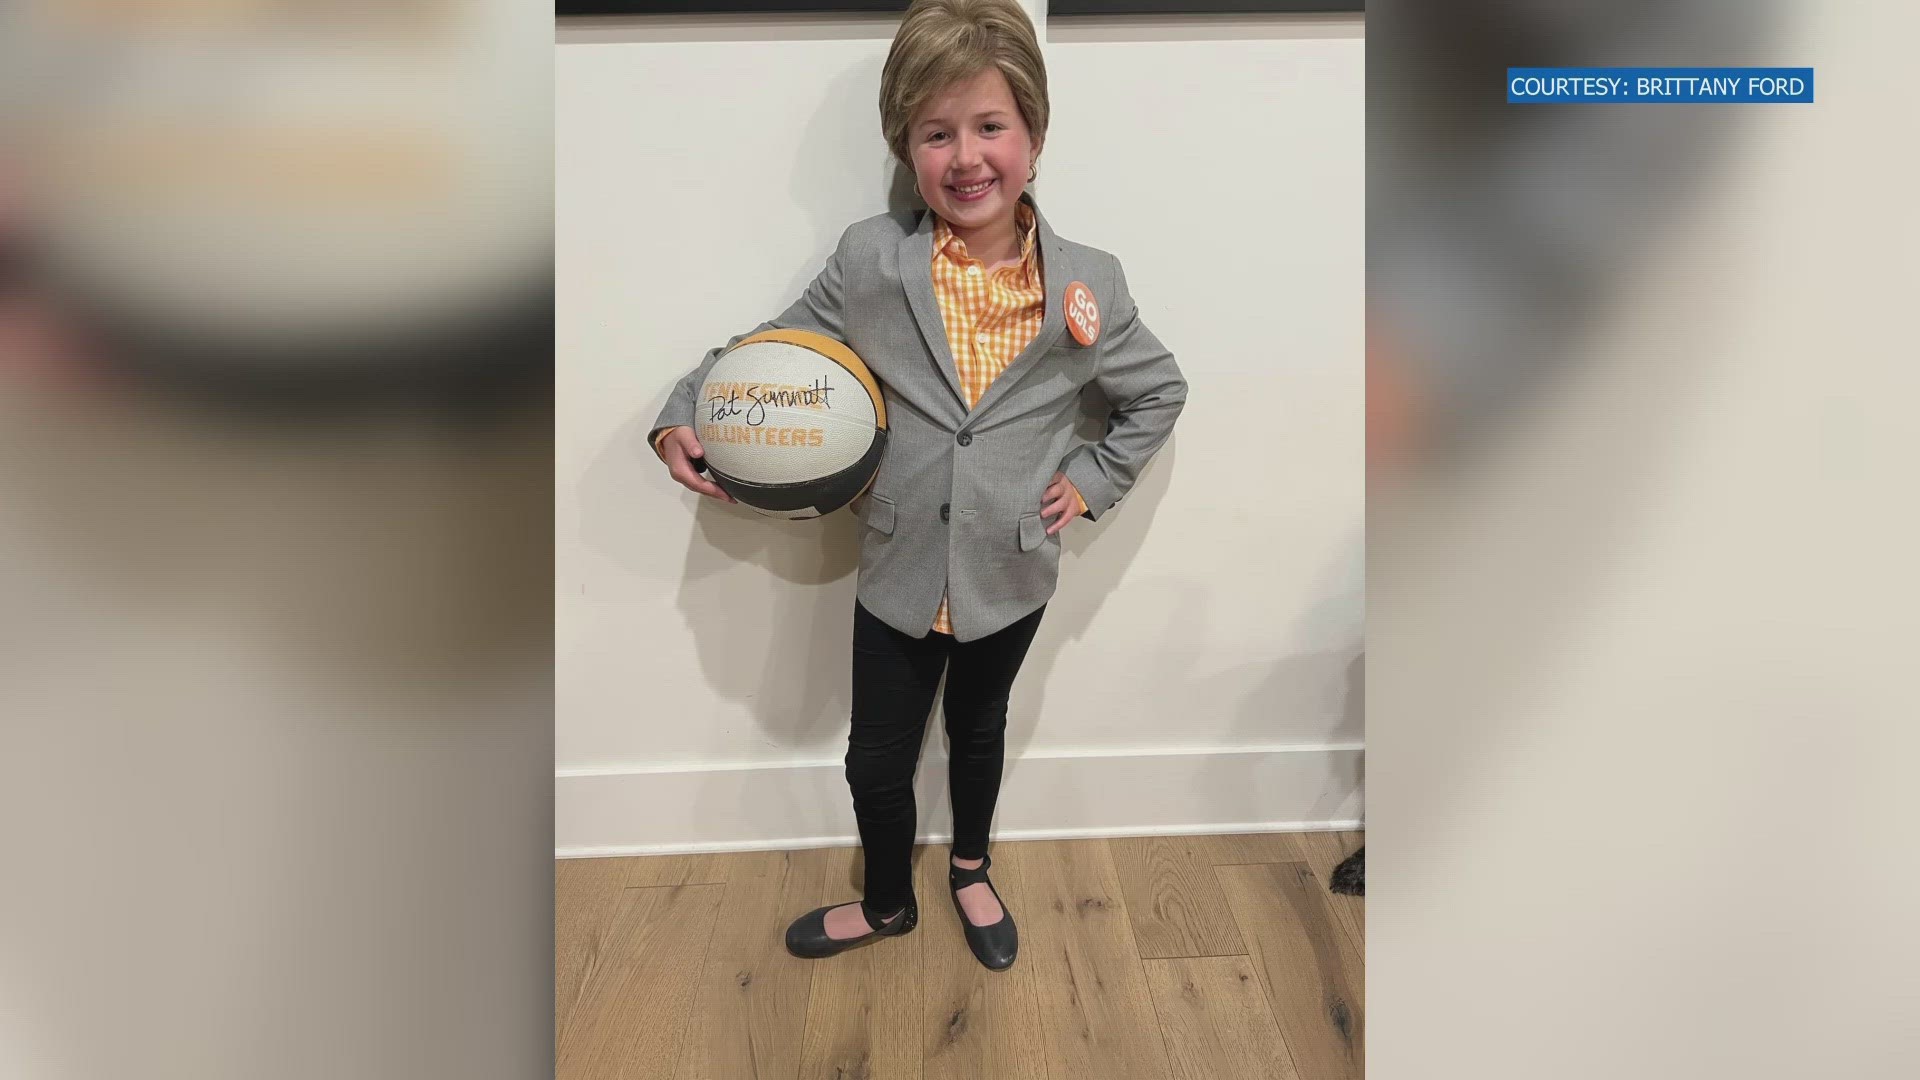 Brittany Ford shared pictures of her daughter Hadley dressed up as the legendary Lady Vols coach for "Famous Tennessean Day" at Northshore Elementary.